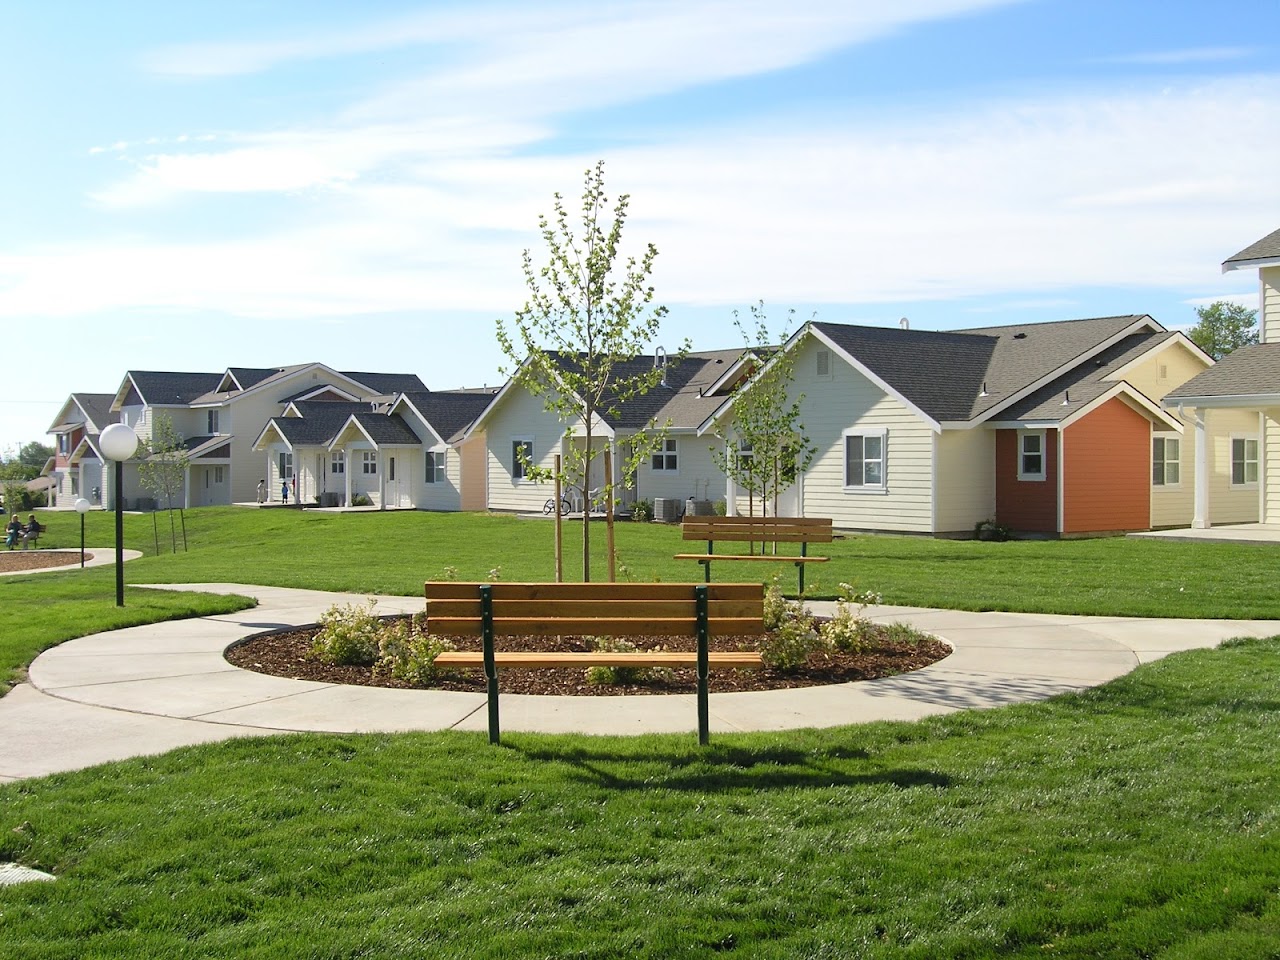 Photo of DESERT HAVEN. Affordable housing located at 935 S 7TH AVE OTHELLO, WA 99344